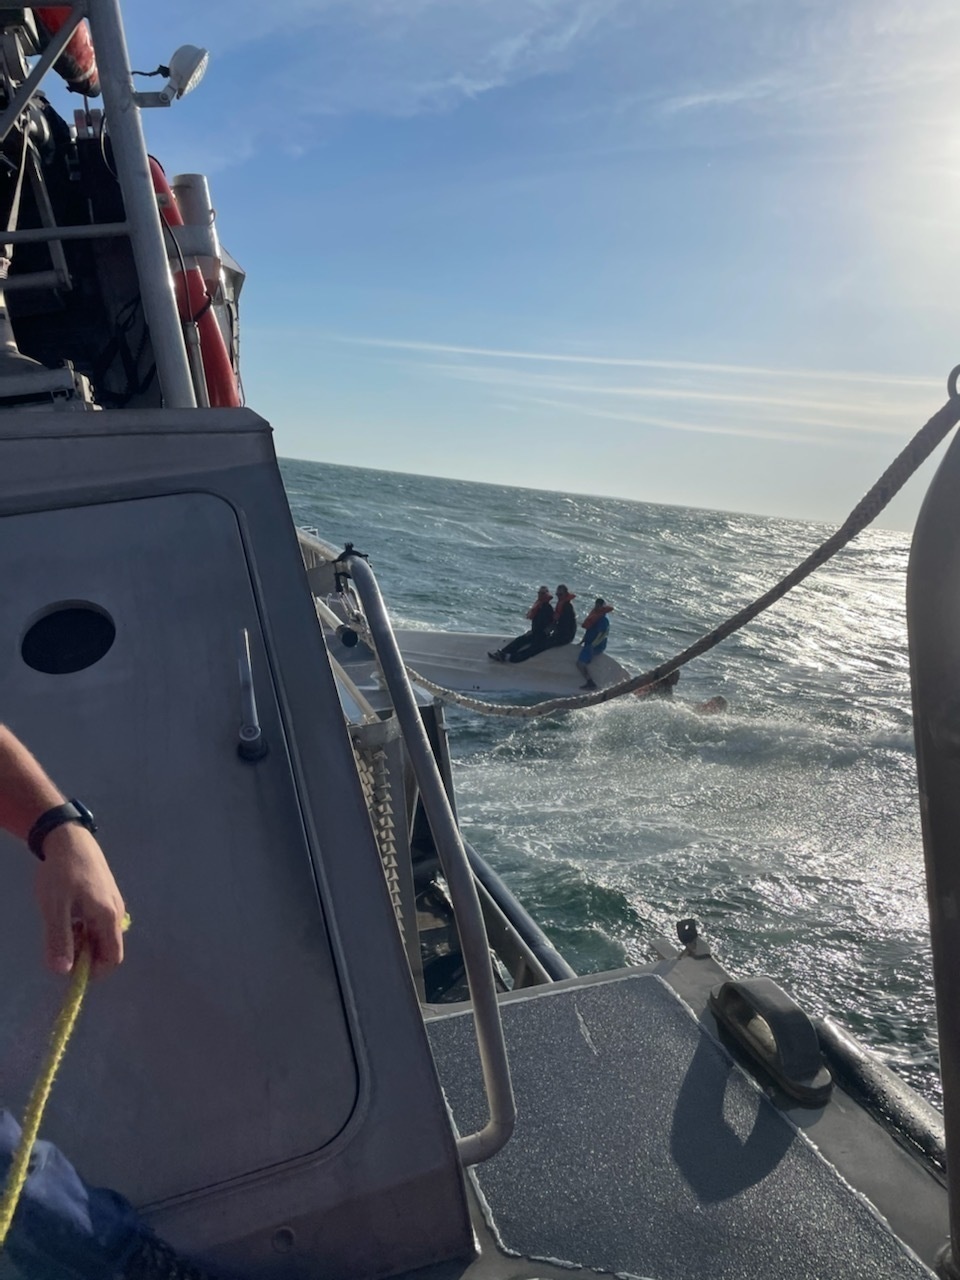 Coast Guard rescues 5 people offshore Oregon Inlet